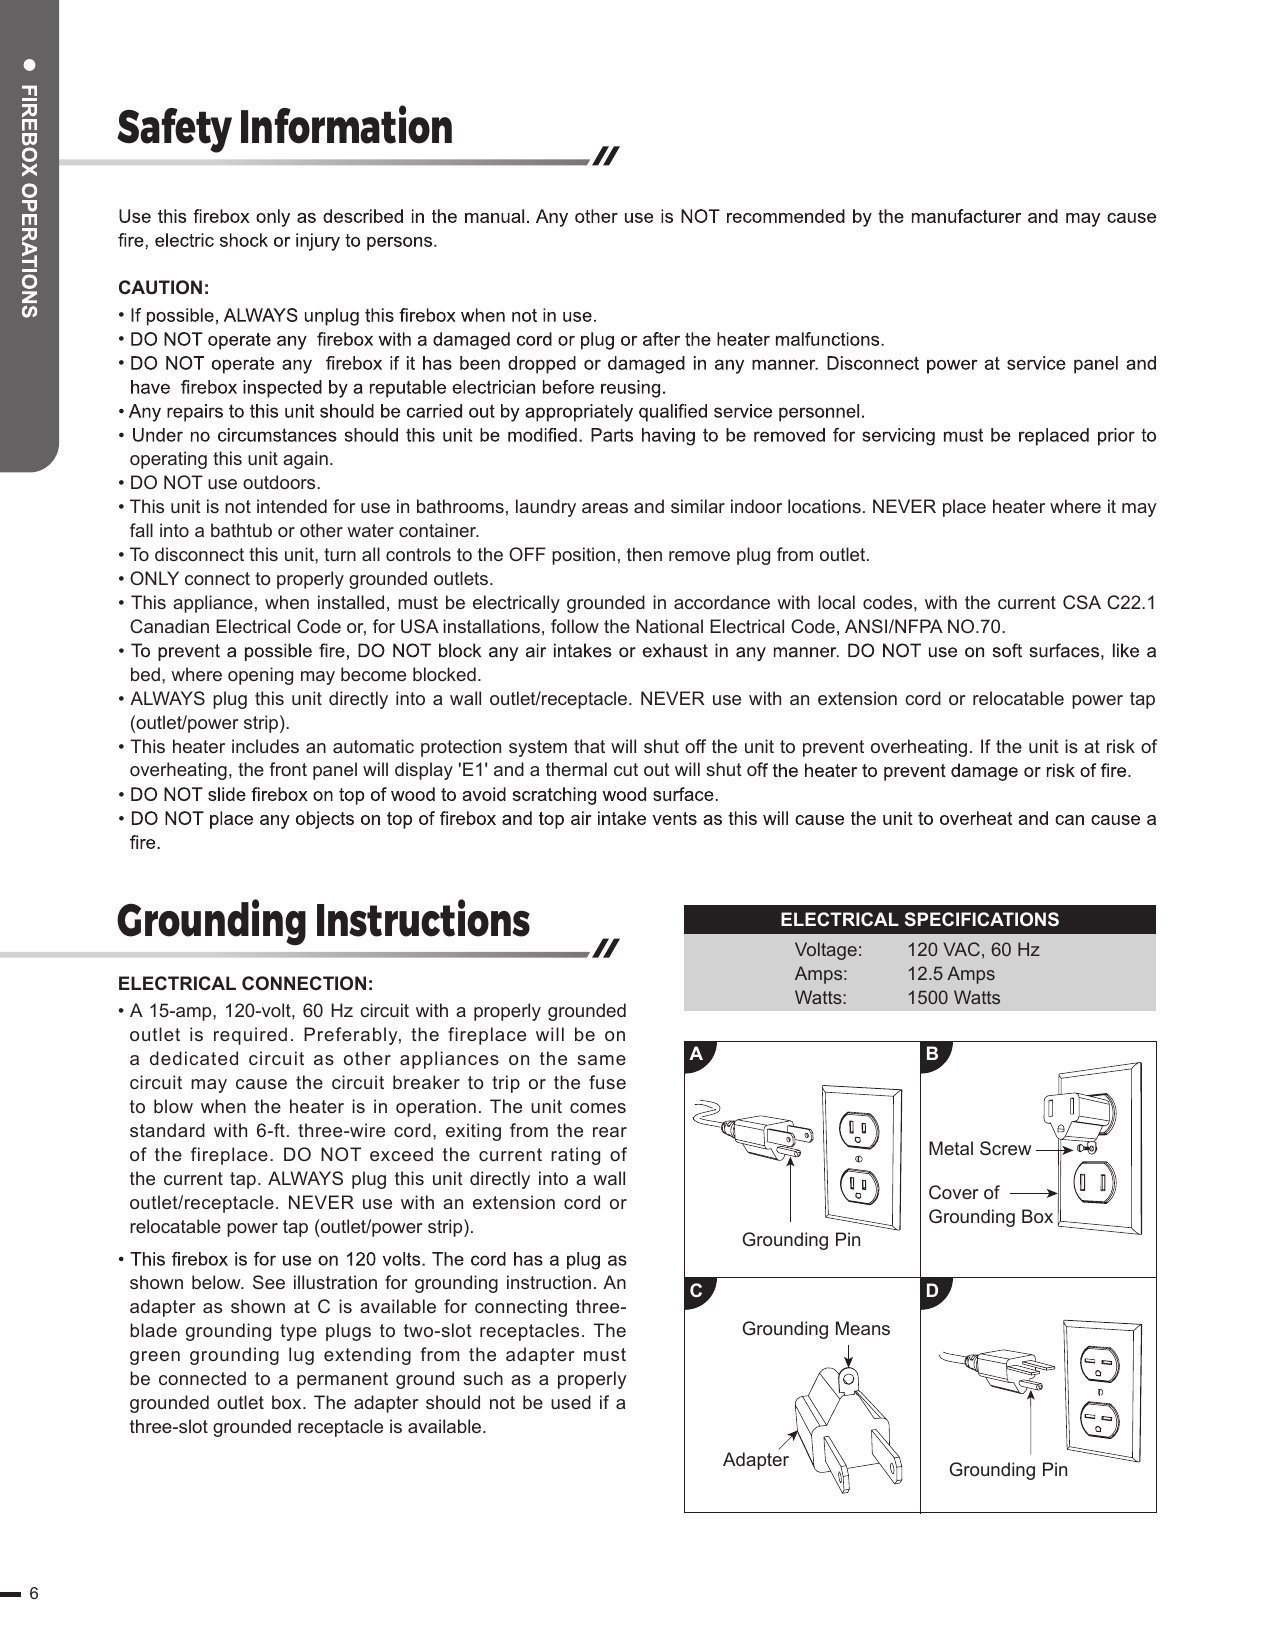 Safety InformationGrounding InstructionsCAUTION:• • • operating this unit again.• DO NOT use outdoors.• This unit is not intended for use in bathrooms, laundry areas and similar indoor locations. NEVER place heater where it may fall into a bathtub or other water container.• To disconnect this unit, turn all controls to the OFF position, then remove plug from outlet.• ONLY connect to properly grounded outlets.• This appliance, when installed, must be electrically grounded in accordance with local codes, with the current CSA C22.1 Canadian Electrical Code or, for USA installations, follow the National Electrical Code, ANSI/NFPA NO.70.bed, where opening may become blocked.• ALWAYS plug this unit directly into a wall outlet/receptacle. NEVER use with an extension cord or relocatable power tap (outlet/power strip).• This heater includes an automatic protection system that will shut off the unit to prevent overheating. If the unit is at risk of overheating, the front panel will display &apos;E1&apos; and a thermal cut out will shut ofELECTRICAL CONNECTION:• A 15-amp, 120-volt, 60 Hz circuit with a properly grounded outlet  is required.  Preferably,  the  fireplace will be  on a  dedicated circuit  as  other appliances on  the same circuit may cause the circuit breaker to trip or the fuse to blow when the heater is in operation. The unit comes standard with 6-ft. three-wire cord, exiting from the rear of the fireplace. DO NOT  exceed the  current rating  of the current tap. ALWAYS plug this unit directly  into a wall outlet/receptacle.  NEVER  use  with  an  extension  cord  or relocatable power tap (outlet/power strip).shown below. See illustration for grounding instruction. An adapter as shown at C is available for connecting three-blade grounding type plugs  to  two-slot  receptacles.  The green  grounding  lug  extending  from  the adapter must be connected to a permanent  ground such as a properly grounded outlet box. The adapter should not be  used if a three-slot grounded receptacle is available.Grounding PinGrounding PinGrounding MeansAdapterACBDMetal ScrewCover of Grounding BoxELECTRICAL SPECIFICATIONSVoltage:Amps:Watts:120 VAC, 60 Hz12.5 Amps1500 Watts6